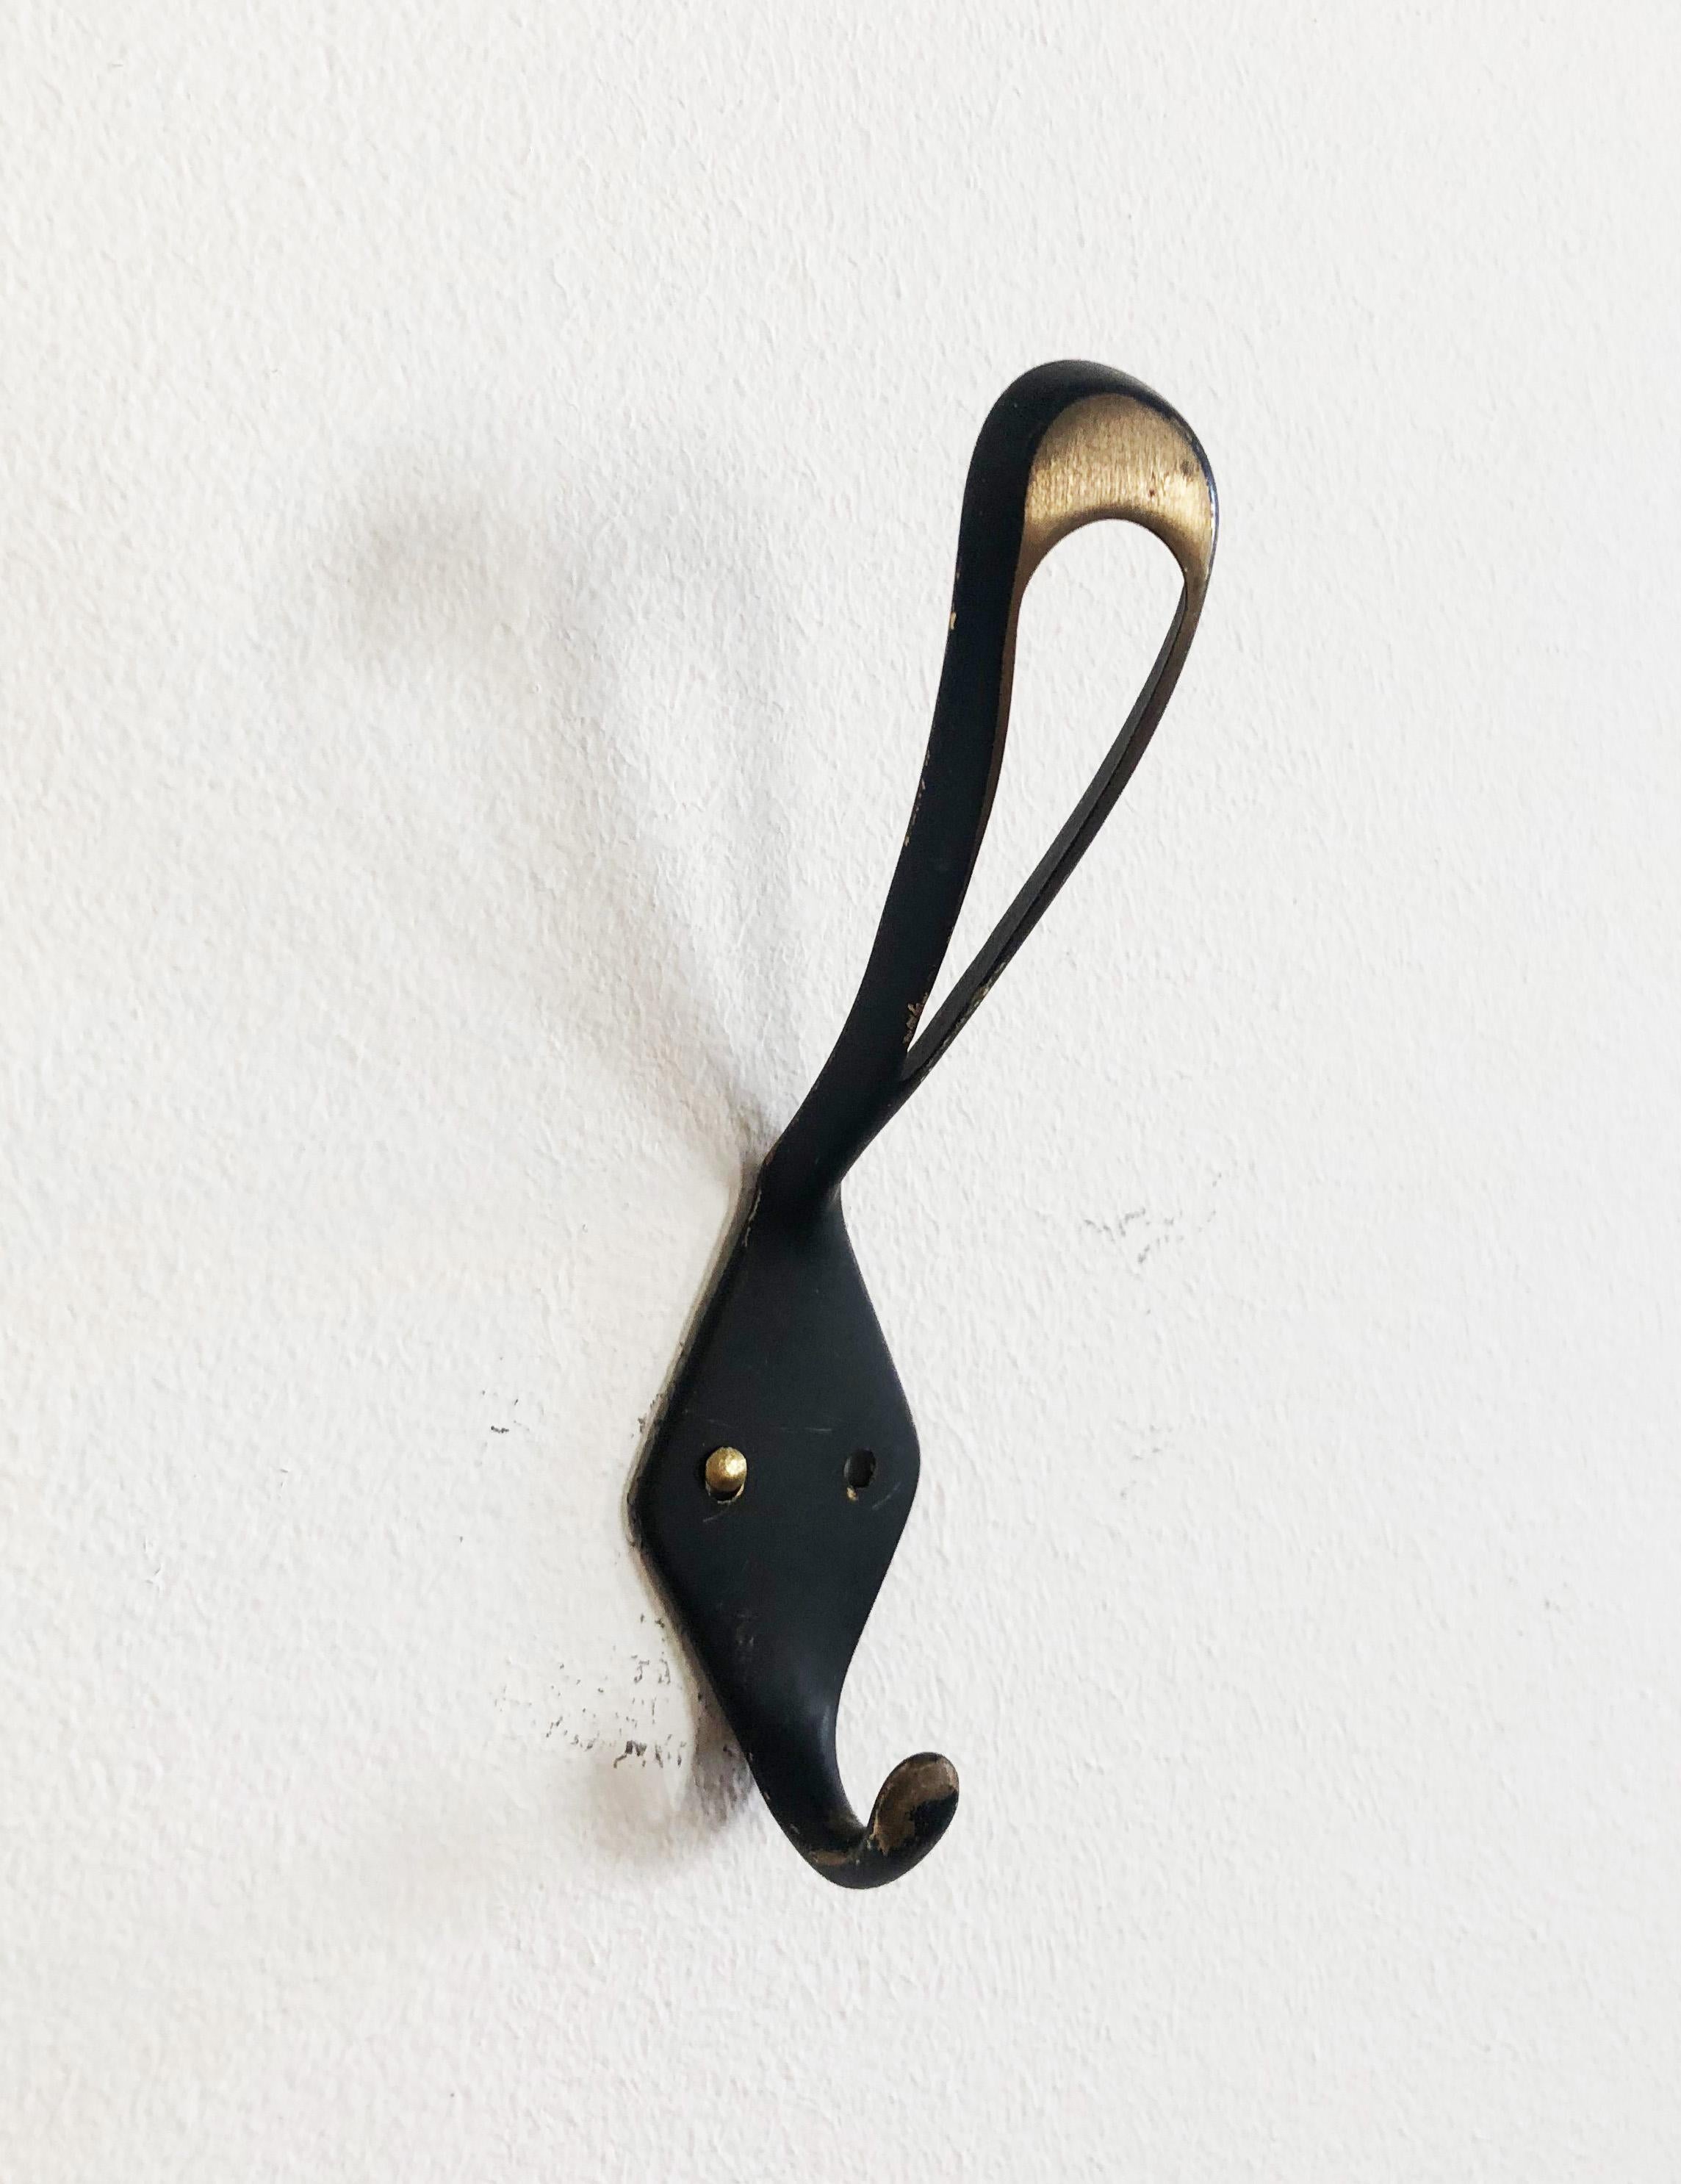 Austrian Midcentury Brass Wall Hooks In Excellent Condition For Sale In Vienna, AT